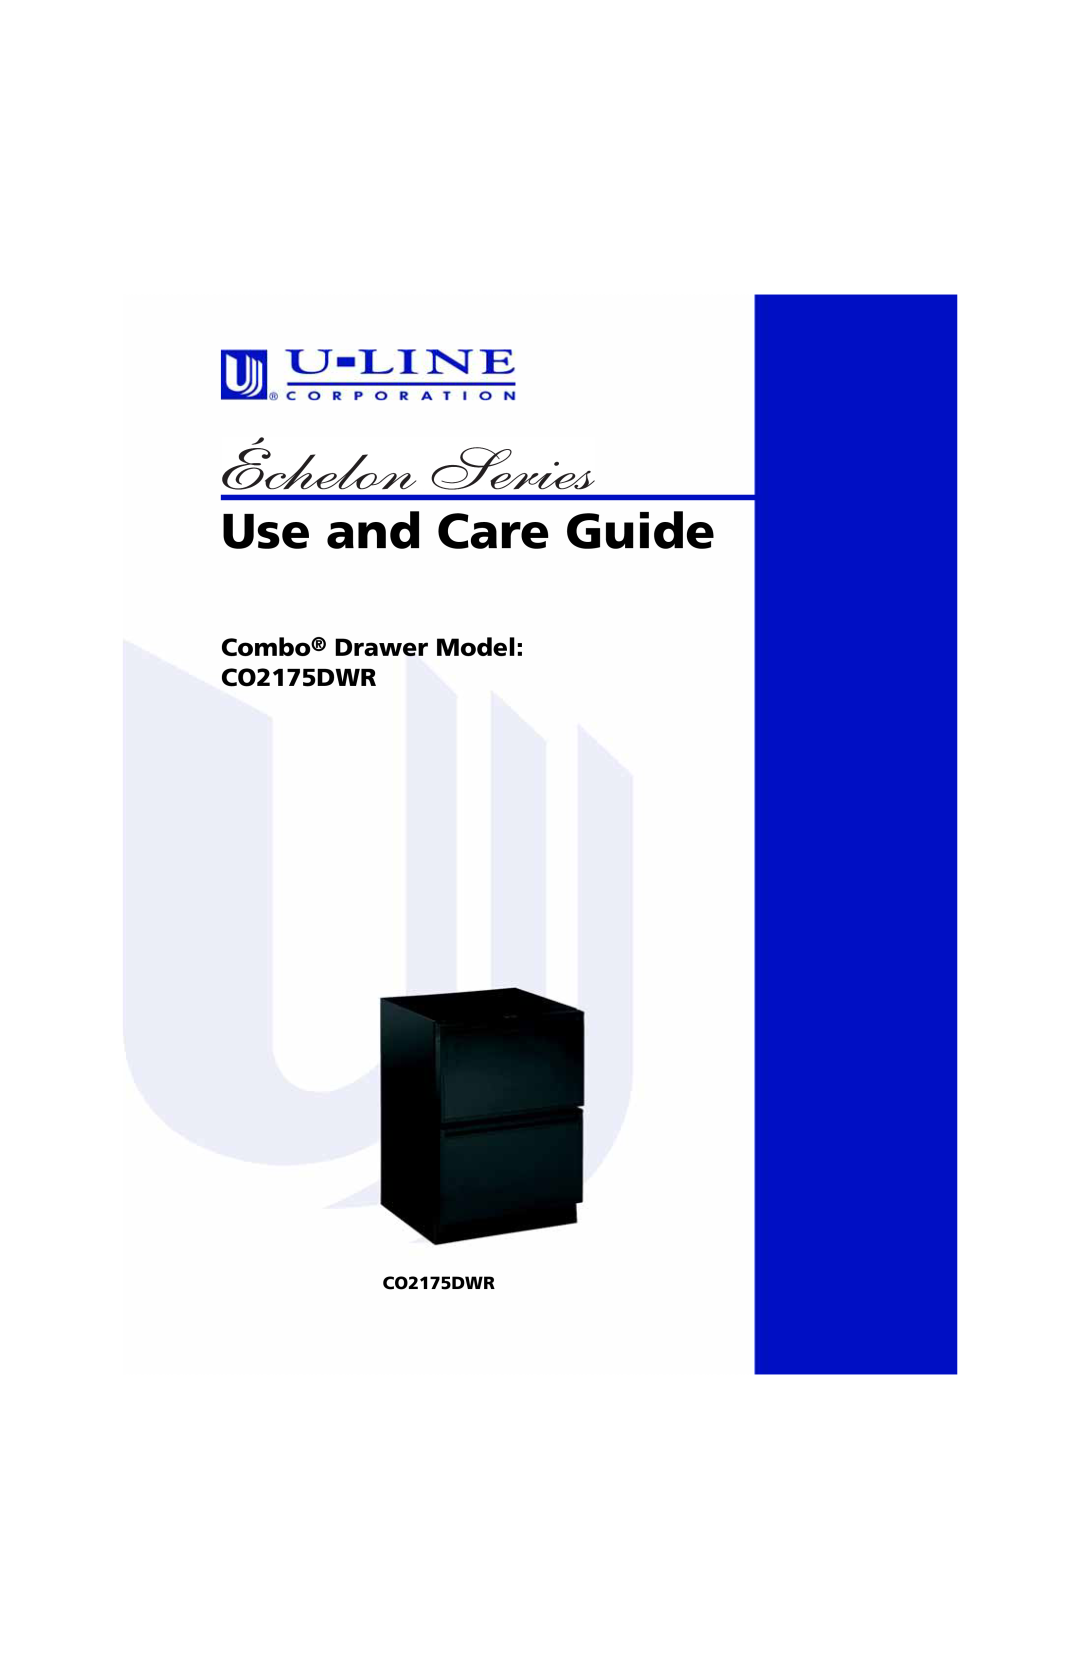 U-Line manual Use and Care Guide, Combo Drawer Model CO2175DWR 